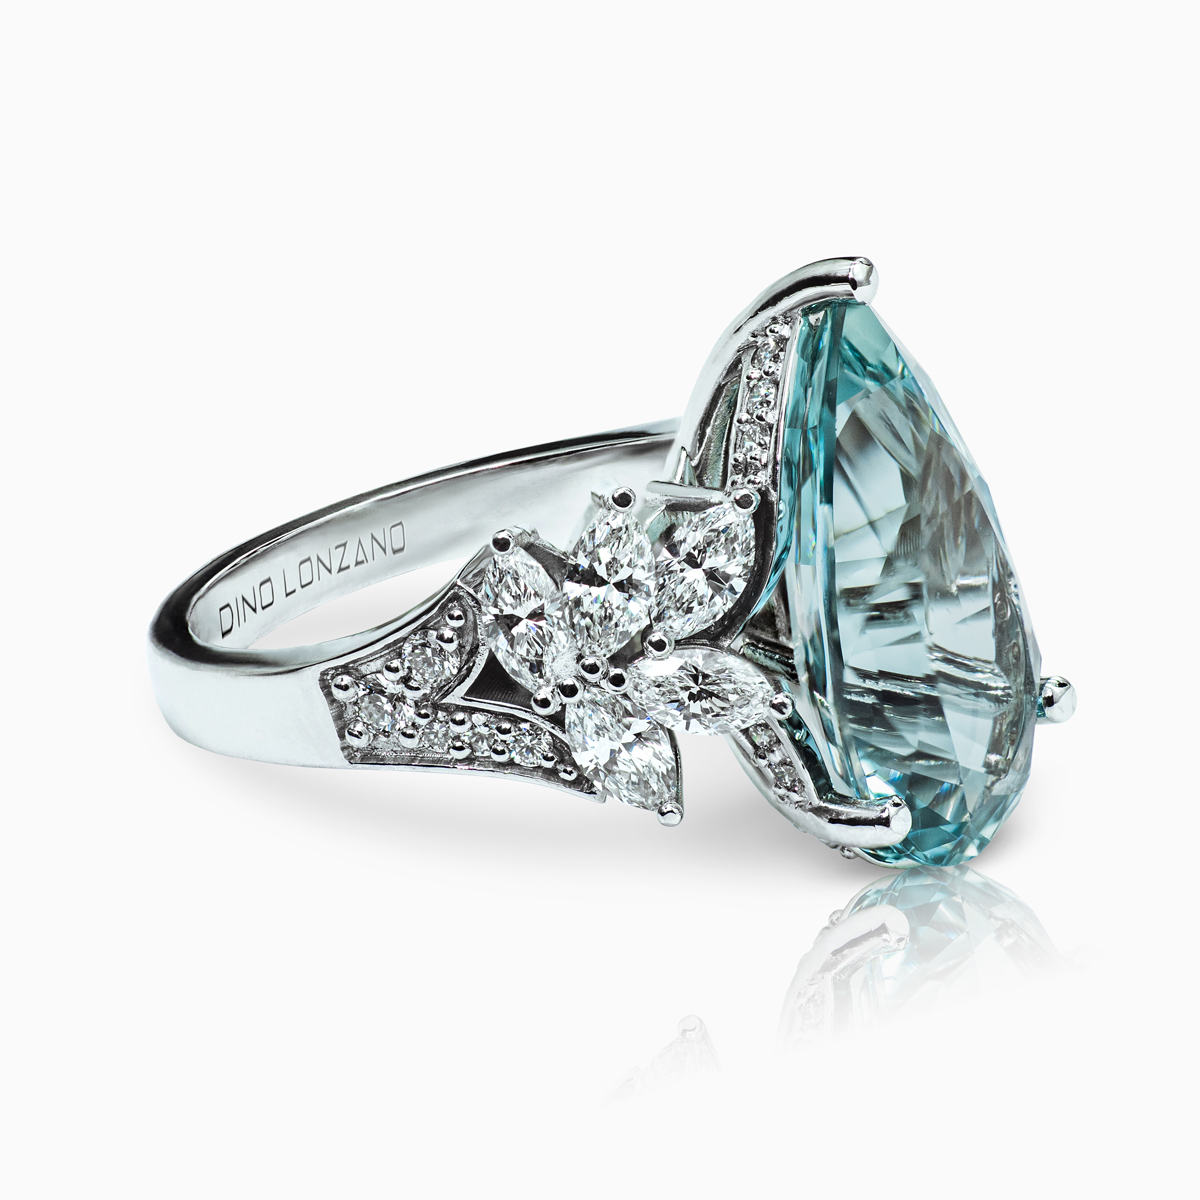 Floral Vintage-Inspired Cocktail Ring with Pear Shaped Madagascar Aquamarine and Diamonds